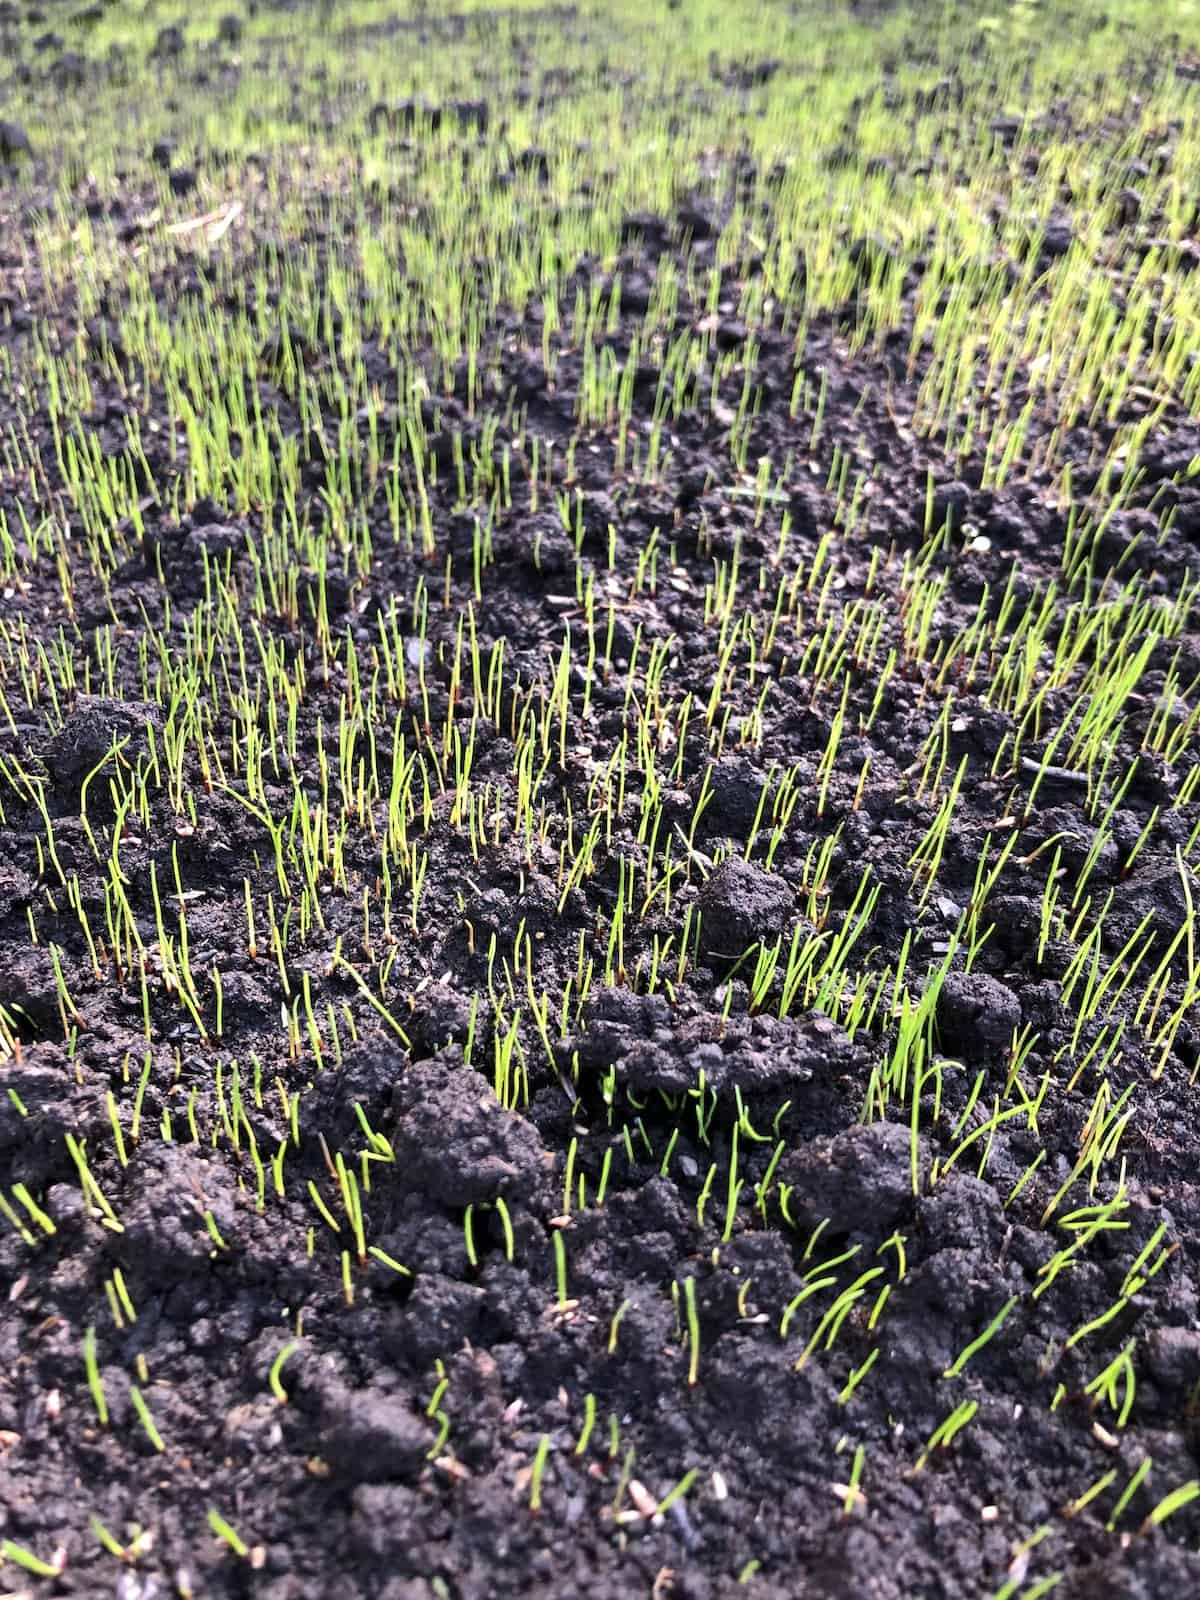 Grass seed growing in soil after germination